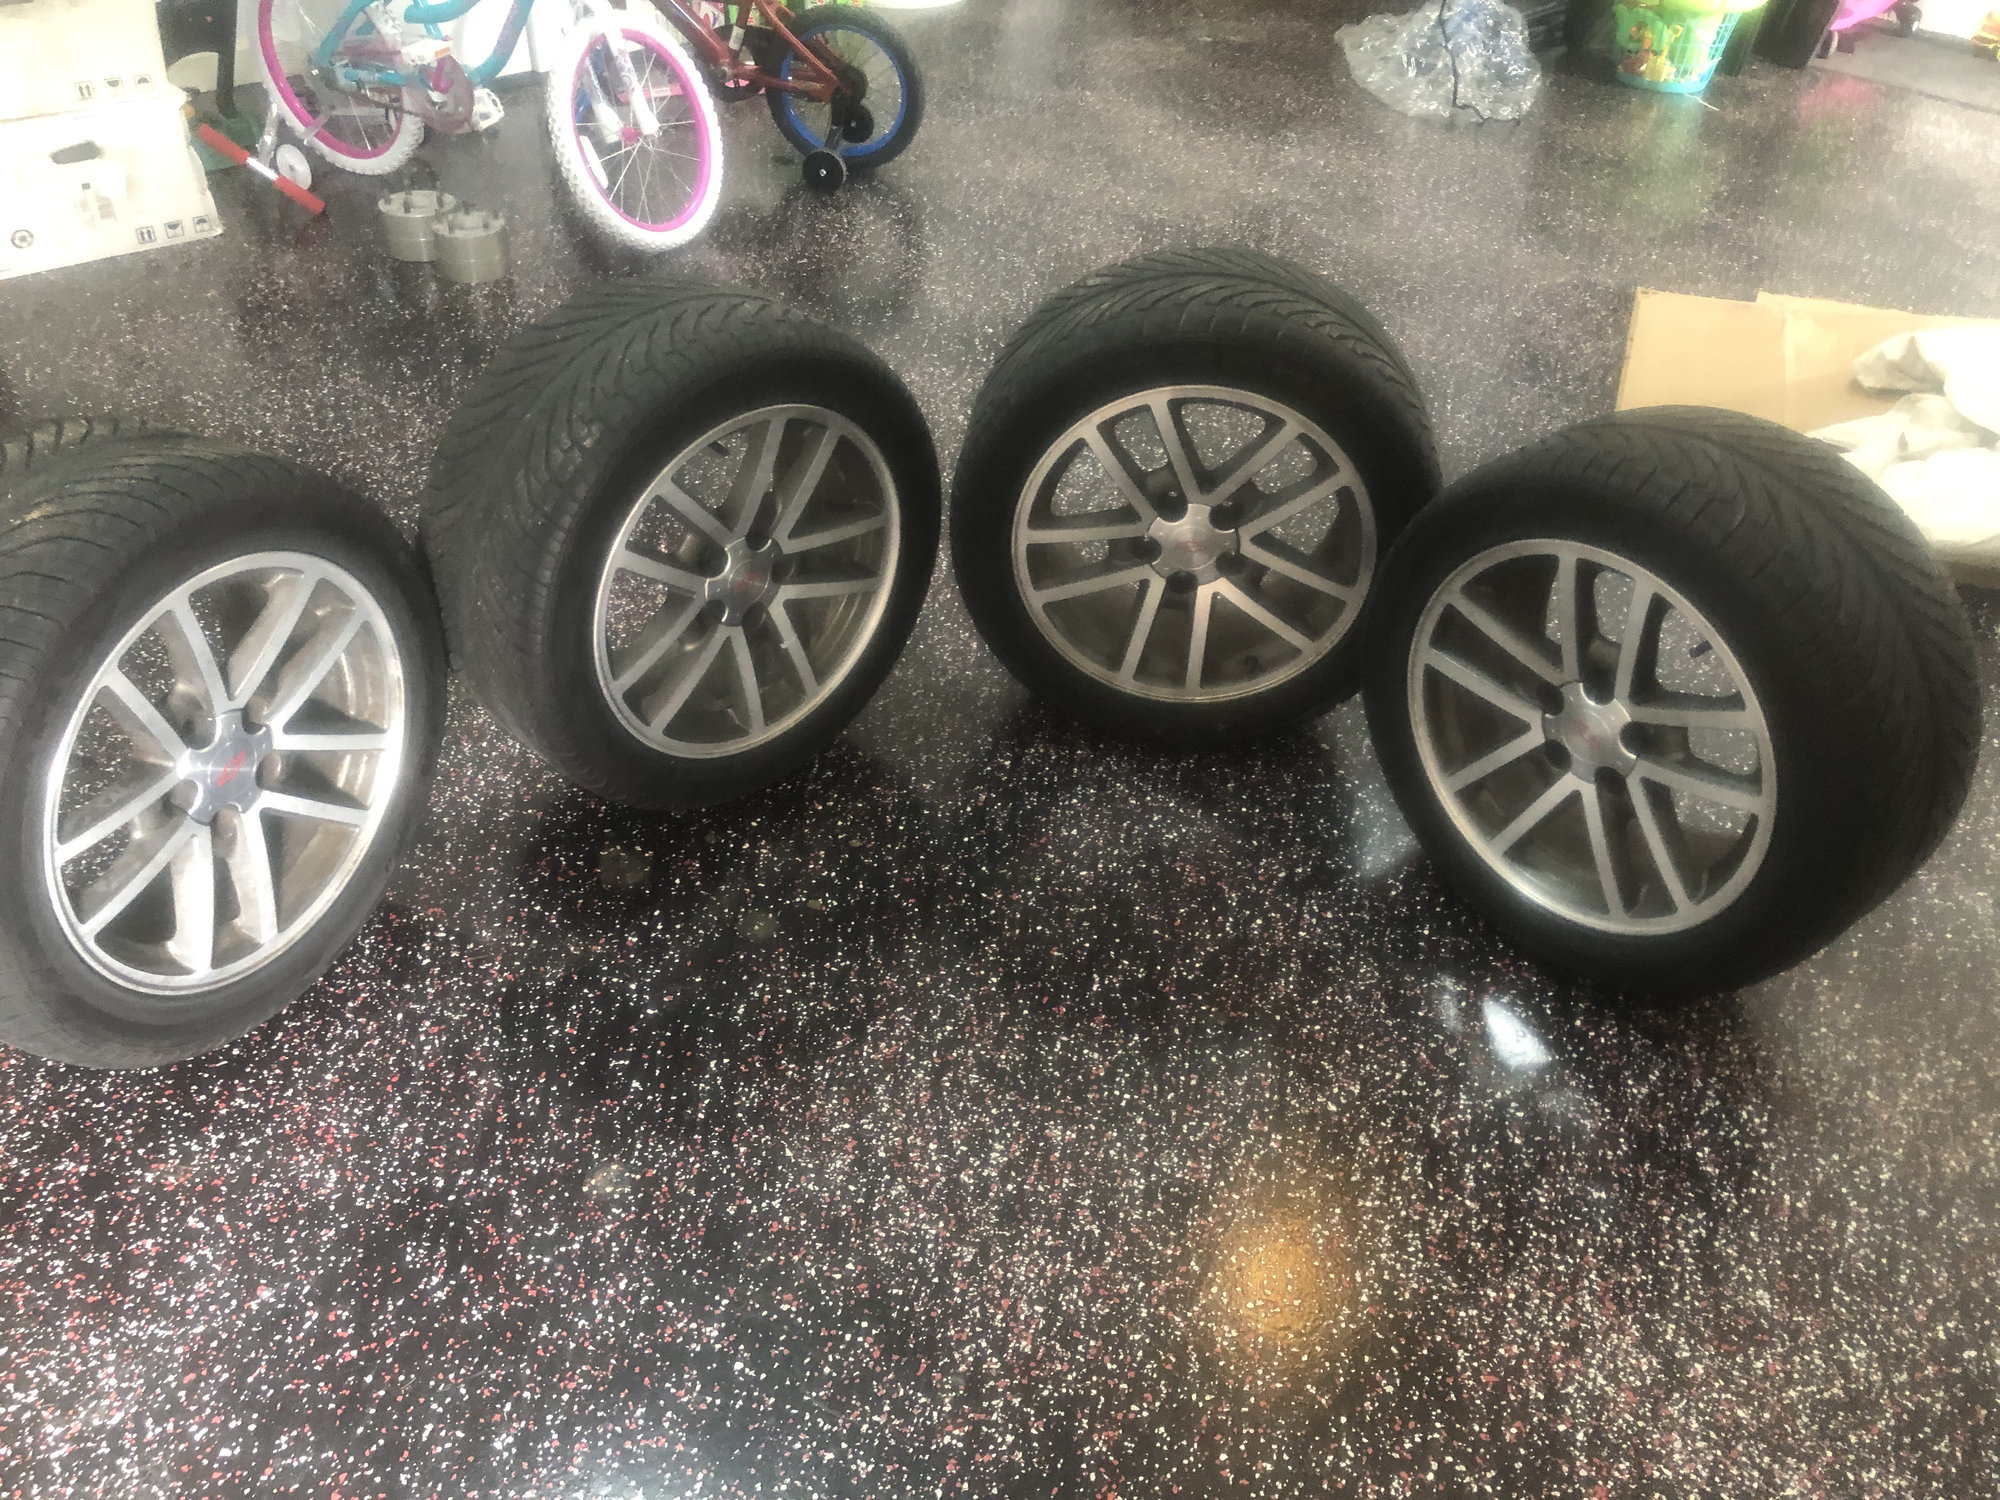  - Selling 2002 Camaro 35th SS Anniversary wheels and tires - South Hill, VA 23970, United States